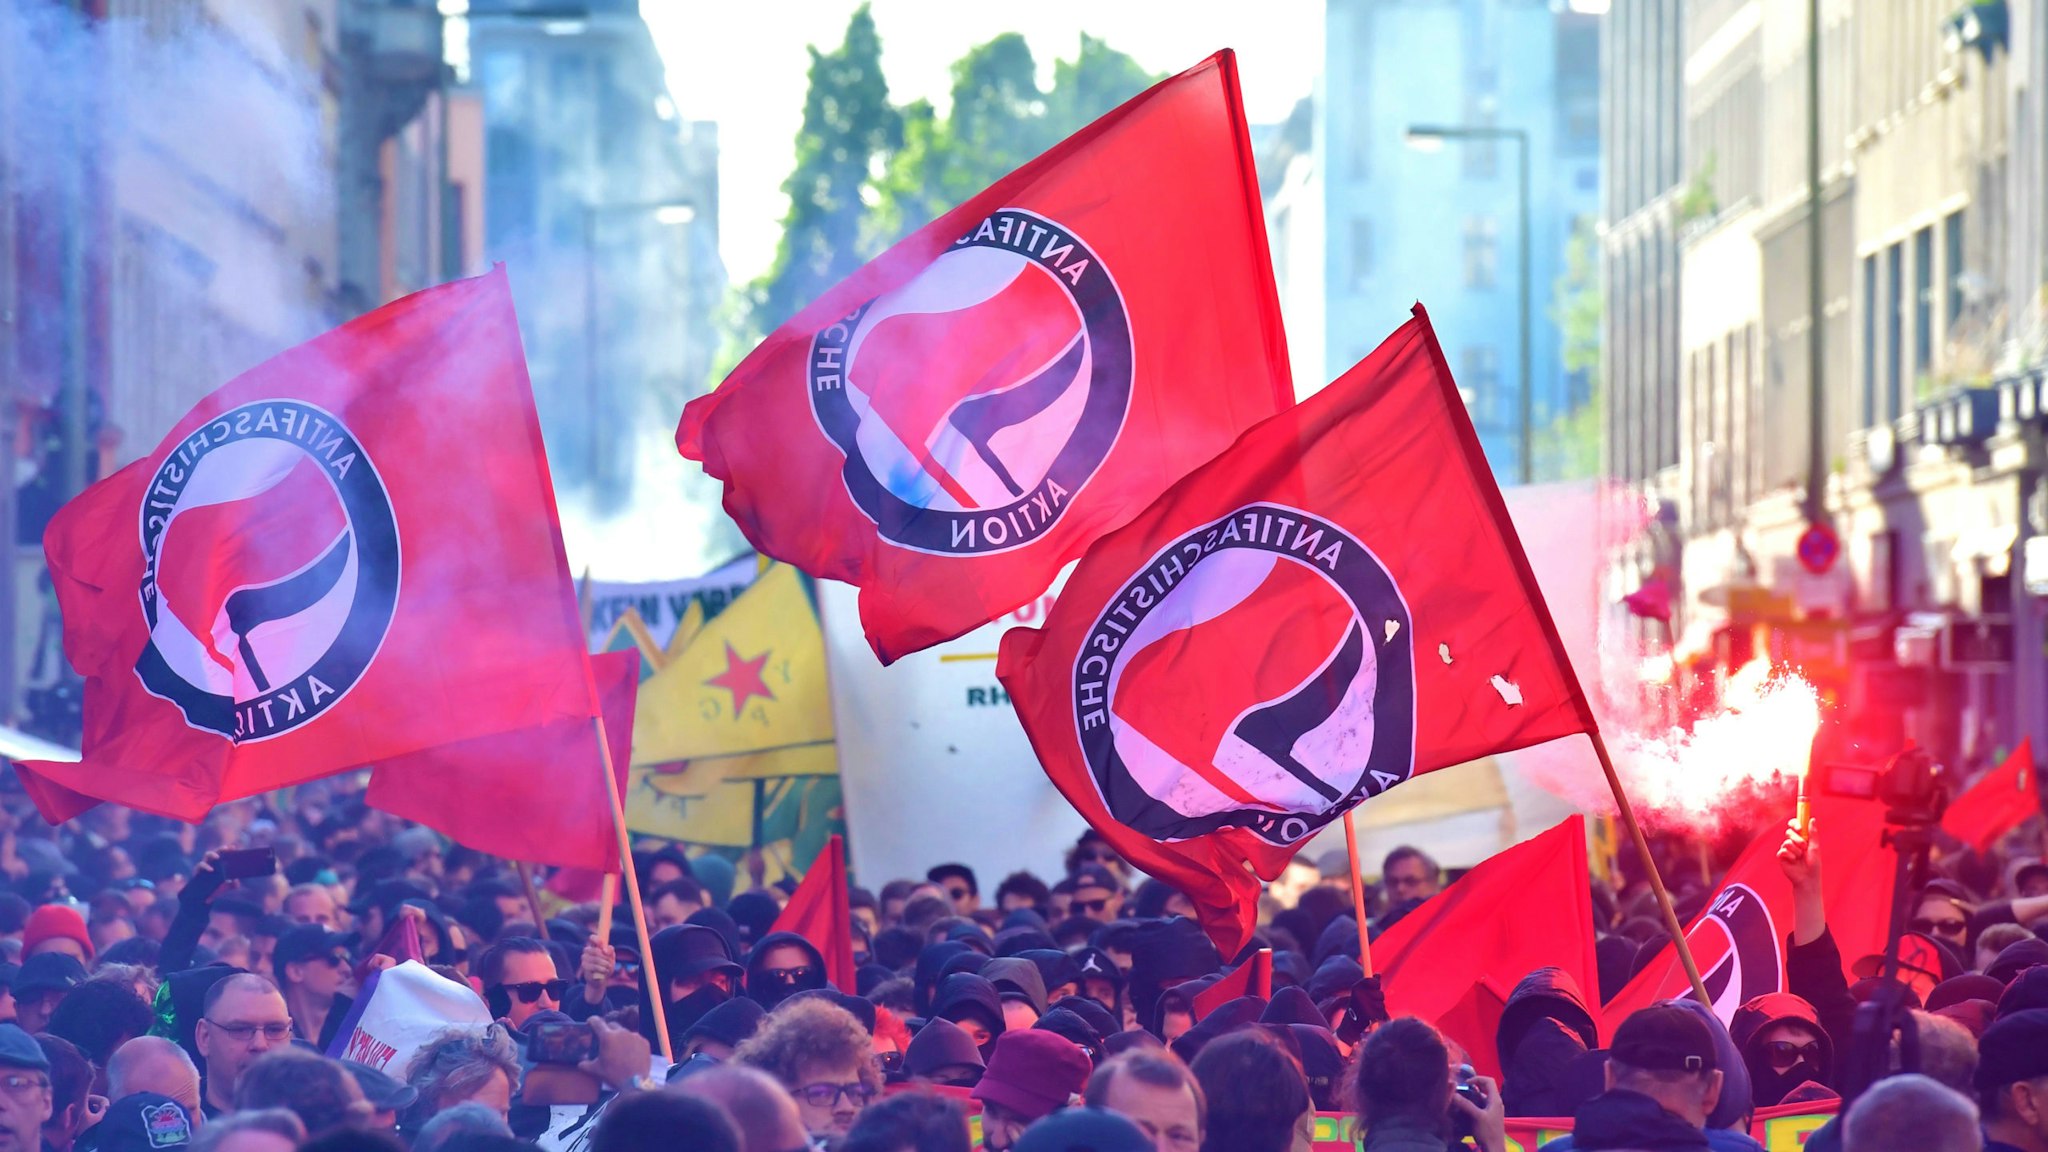 Participants of the "Revolutionary 1st of May Demonstration" light flares and wave flags of the left-wing, Anti-Fascist Antifa movement during May Day events on May 1, 2018 in Berlin.